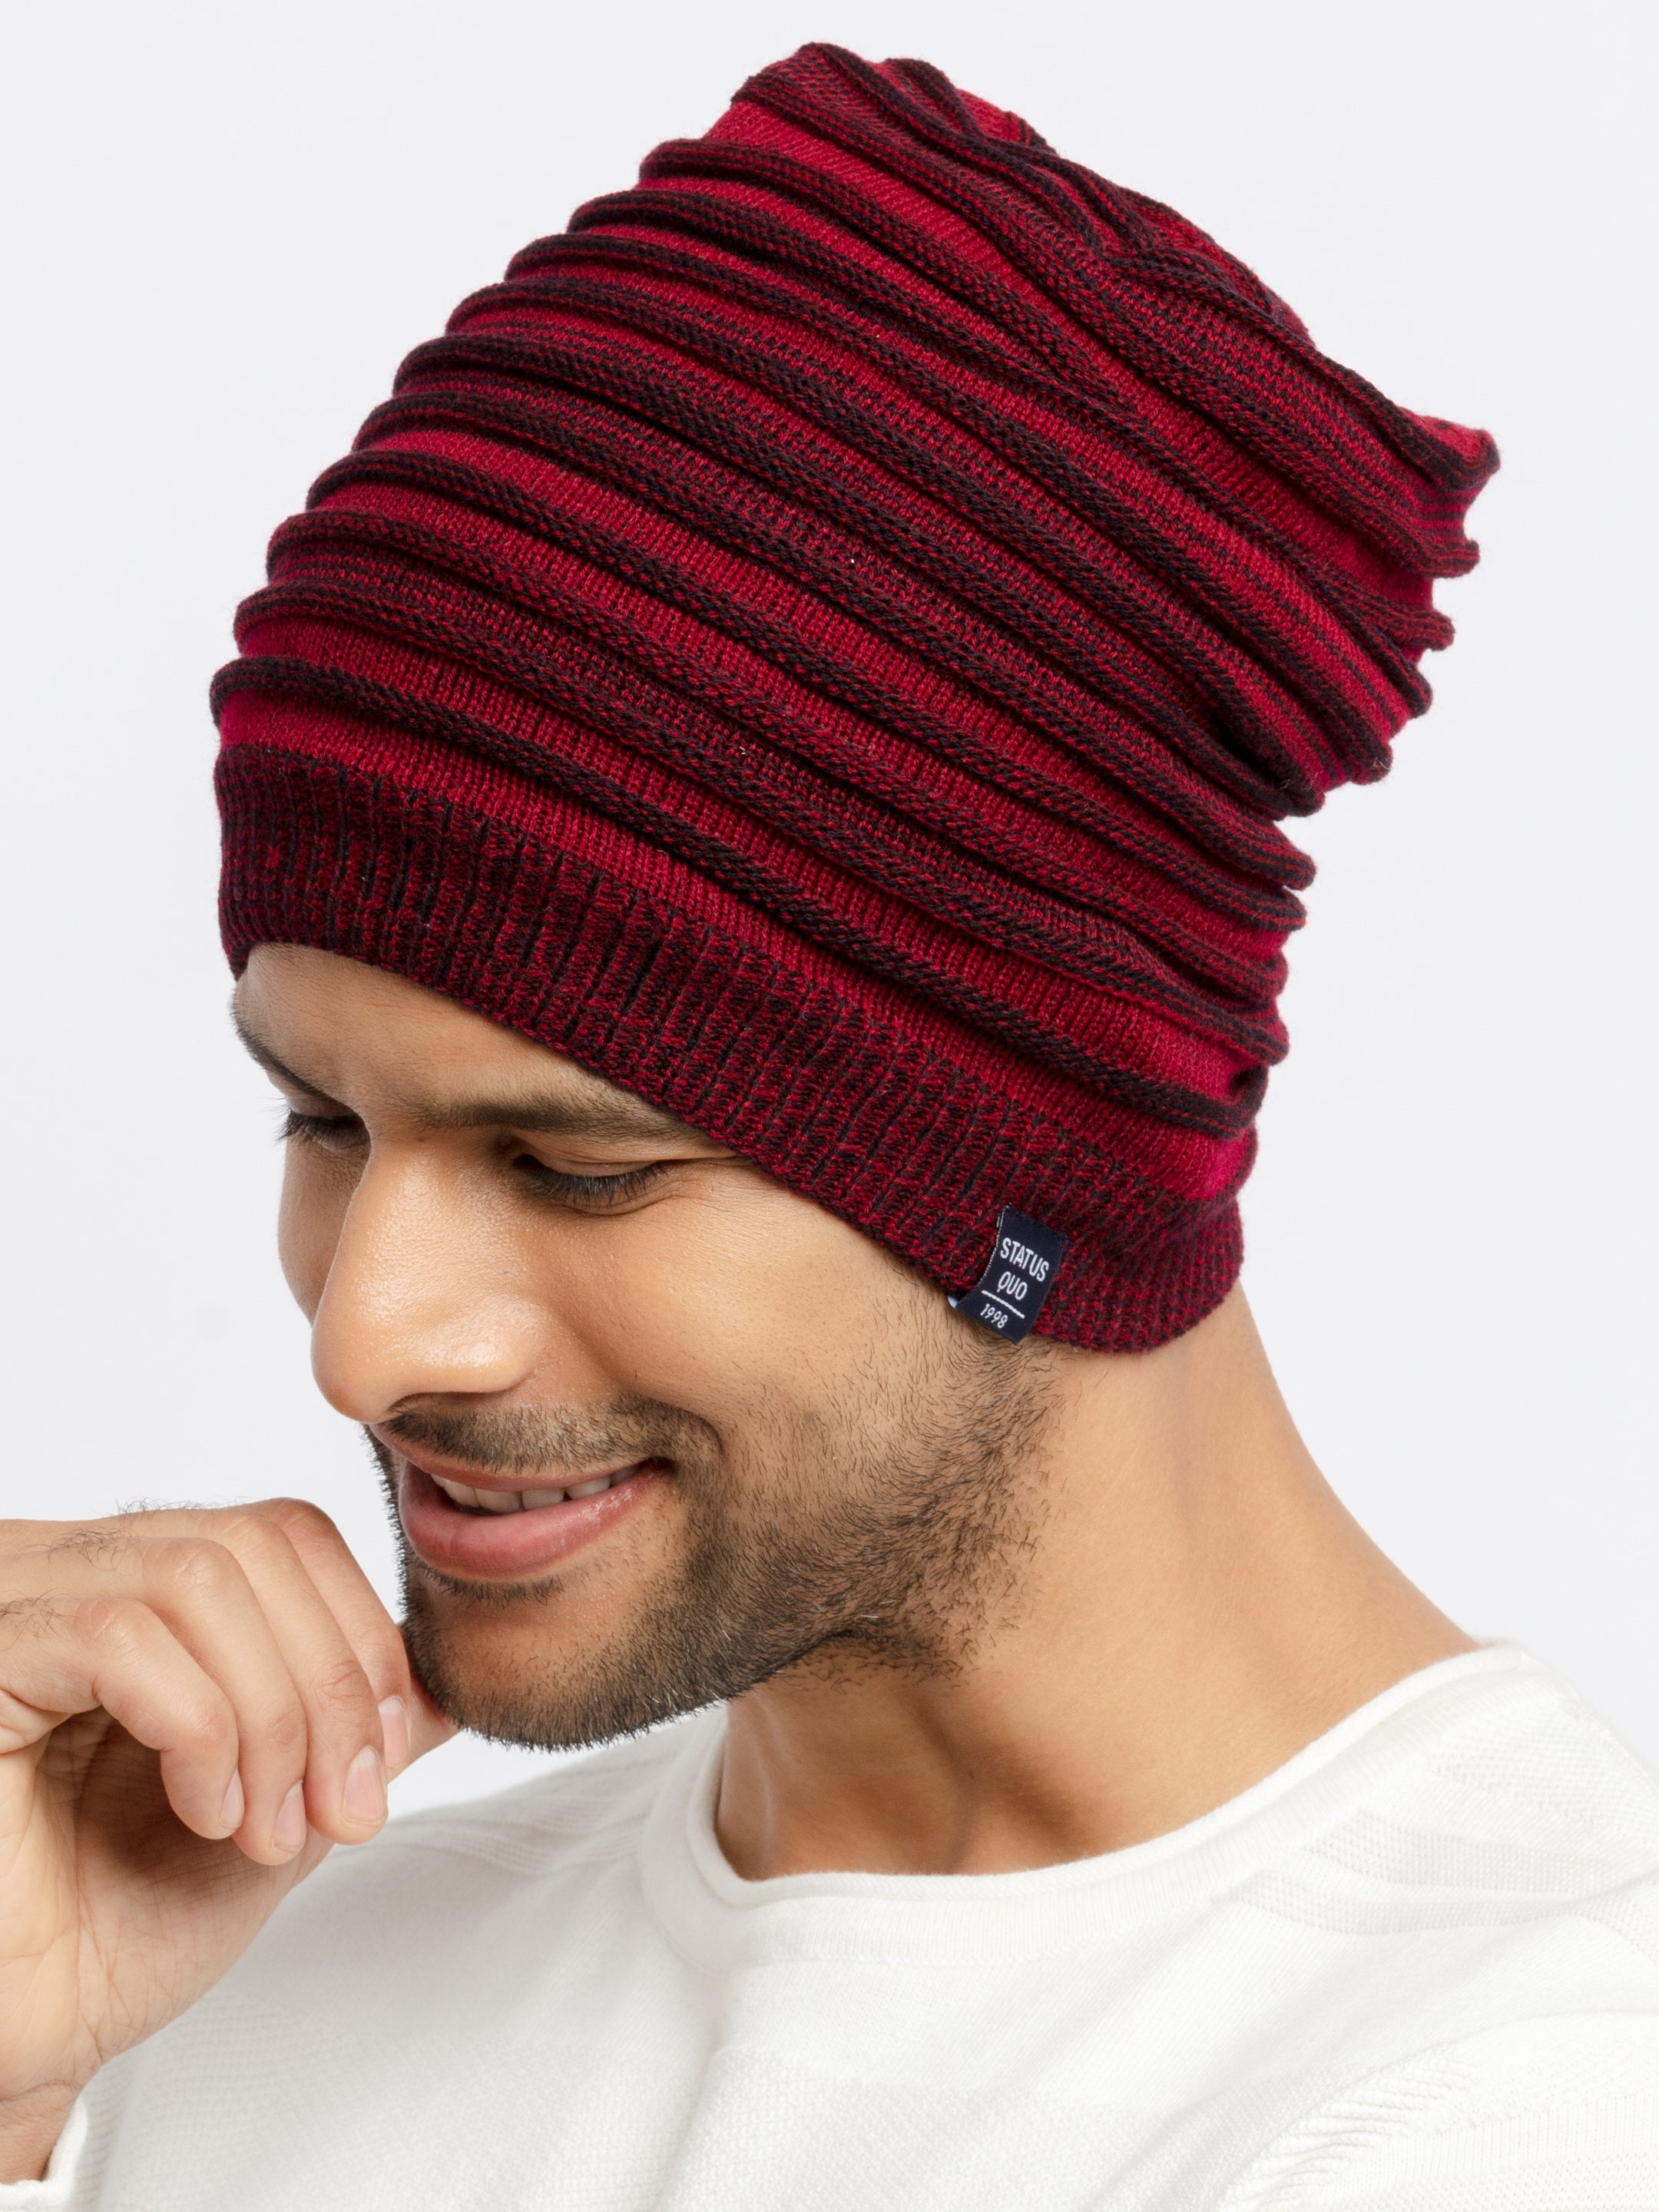 Maroon Mens Knitted Winter Cap